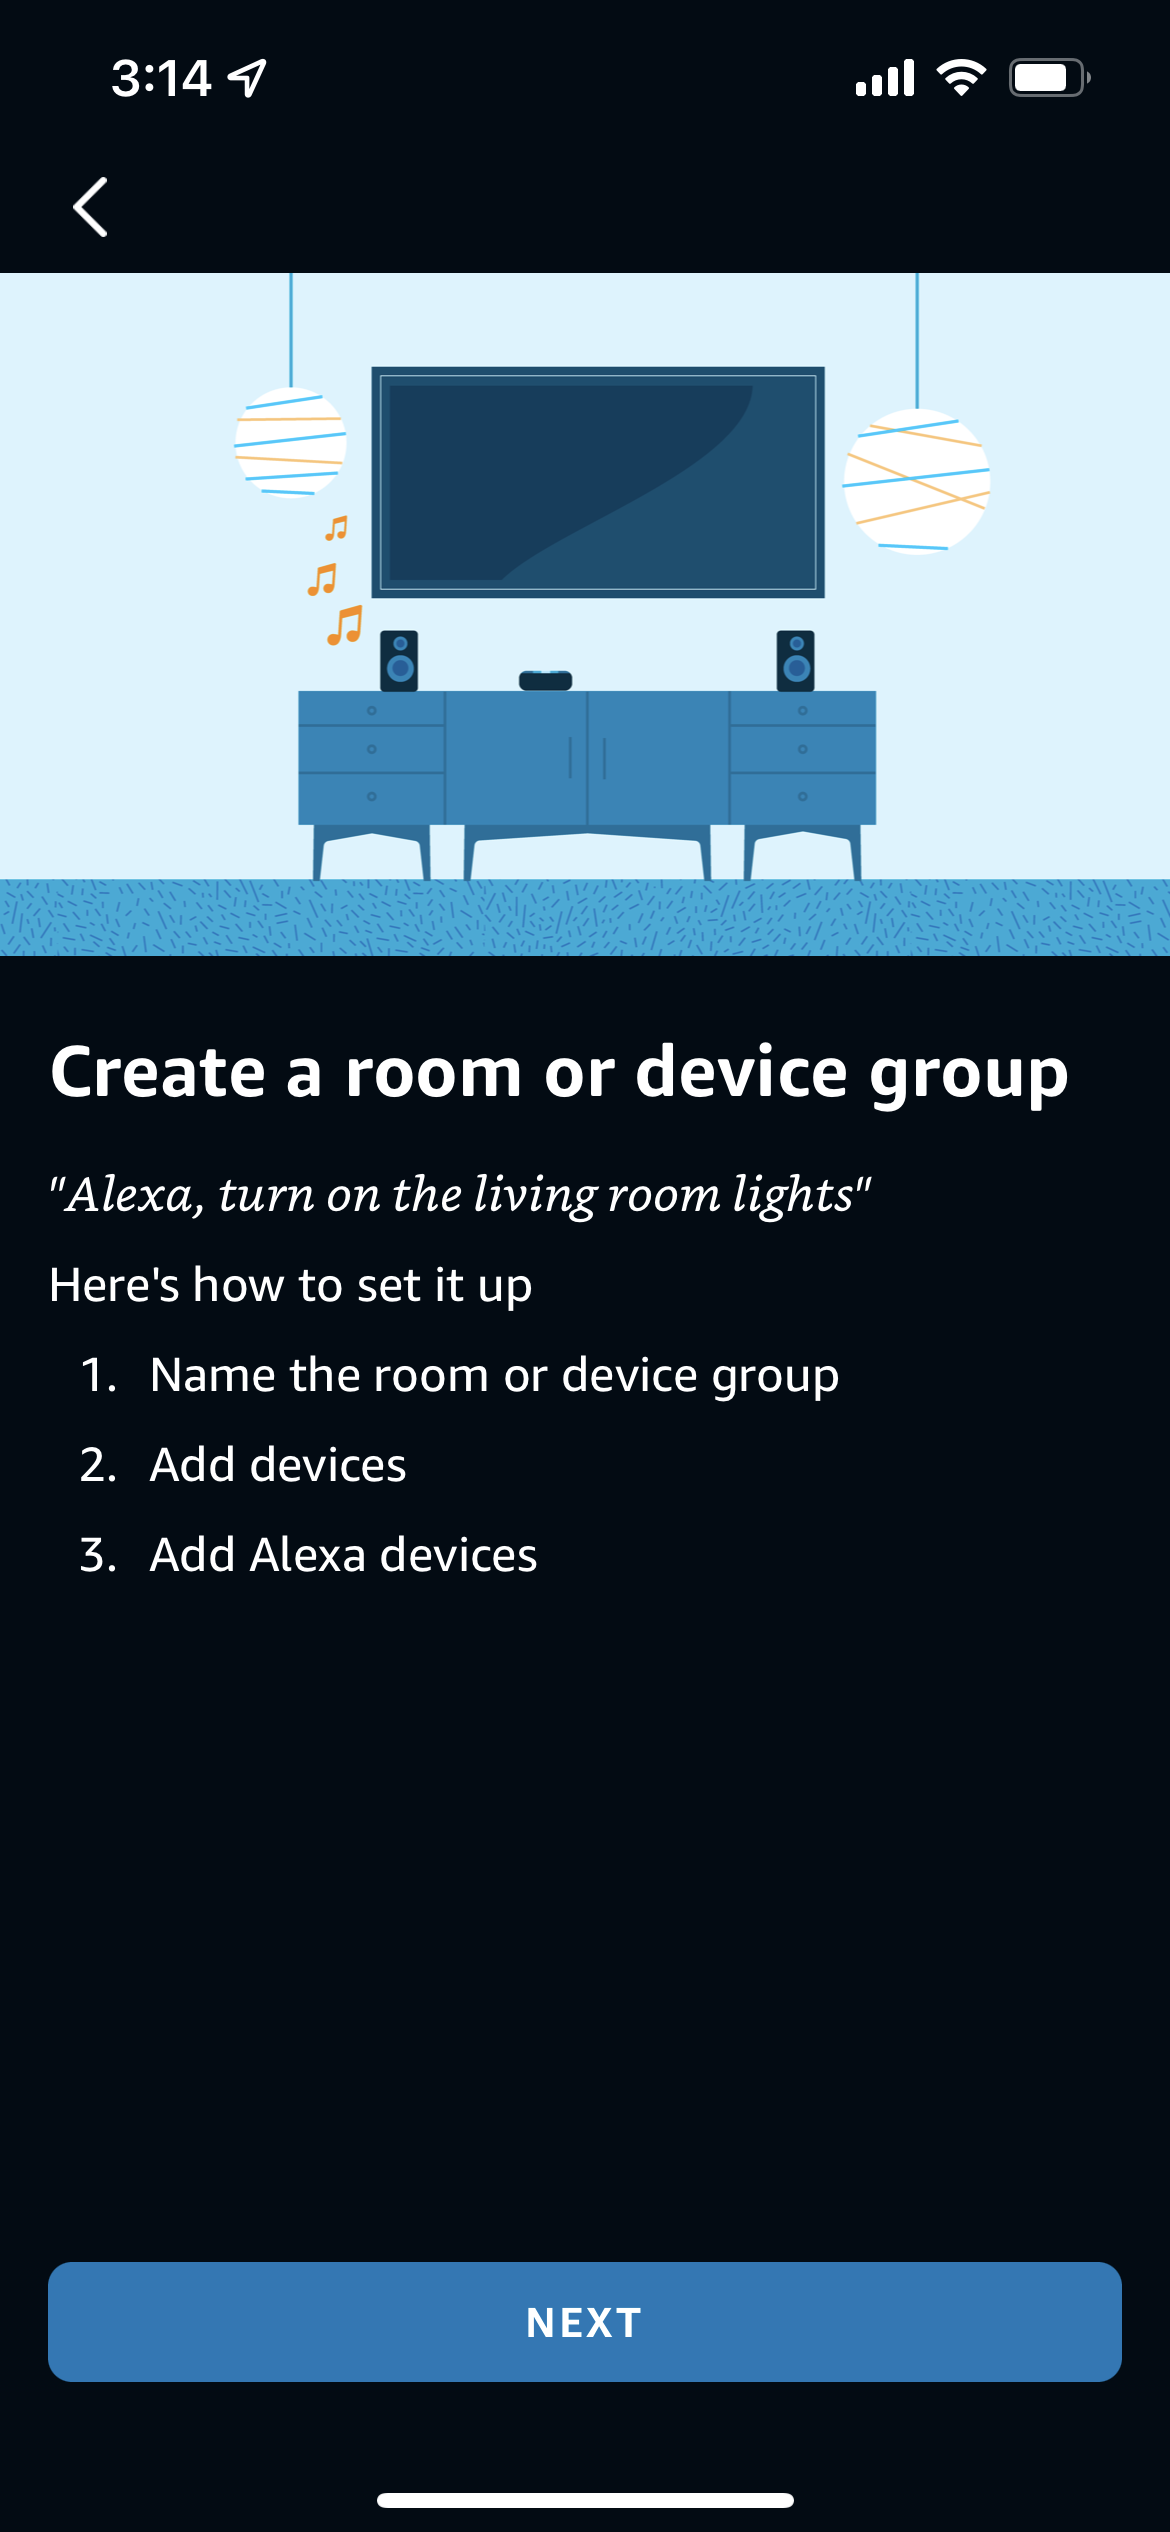 Prompts for creating a group in the Amazon Alexa app